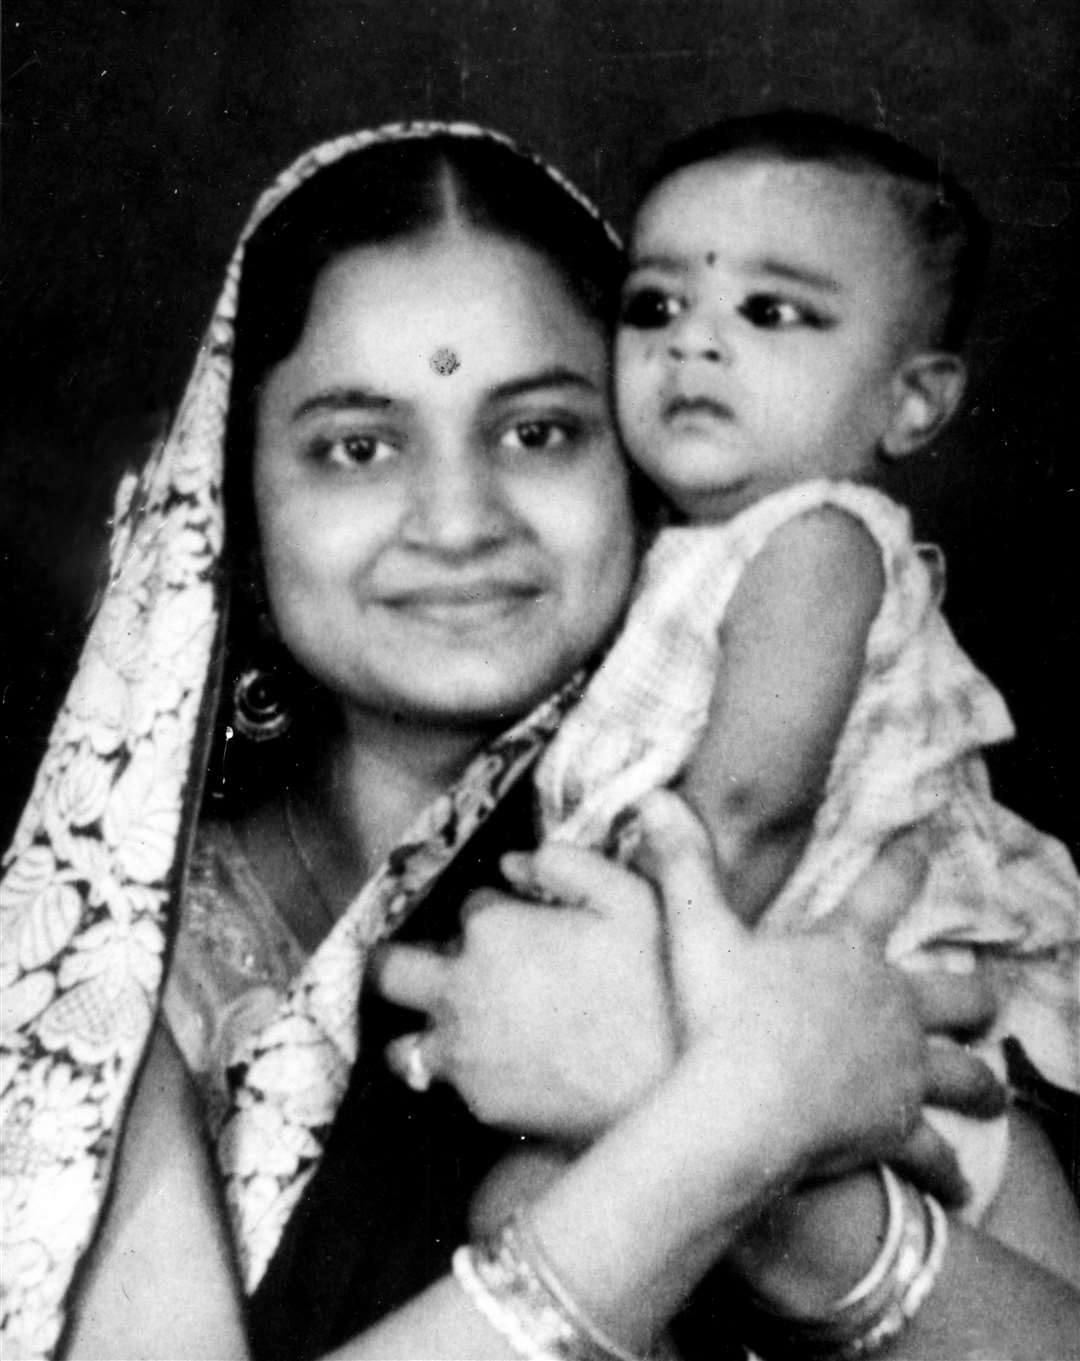 A young Pradip Datta with his mother, Anima, one of the many photos featured in Snapshots of a Caithness Surgeon's Life.